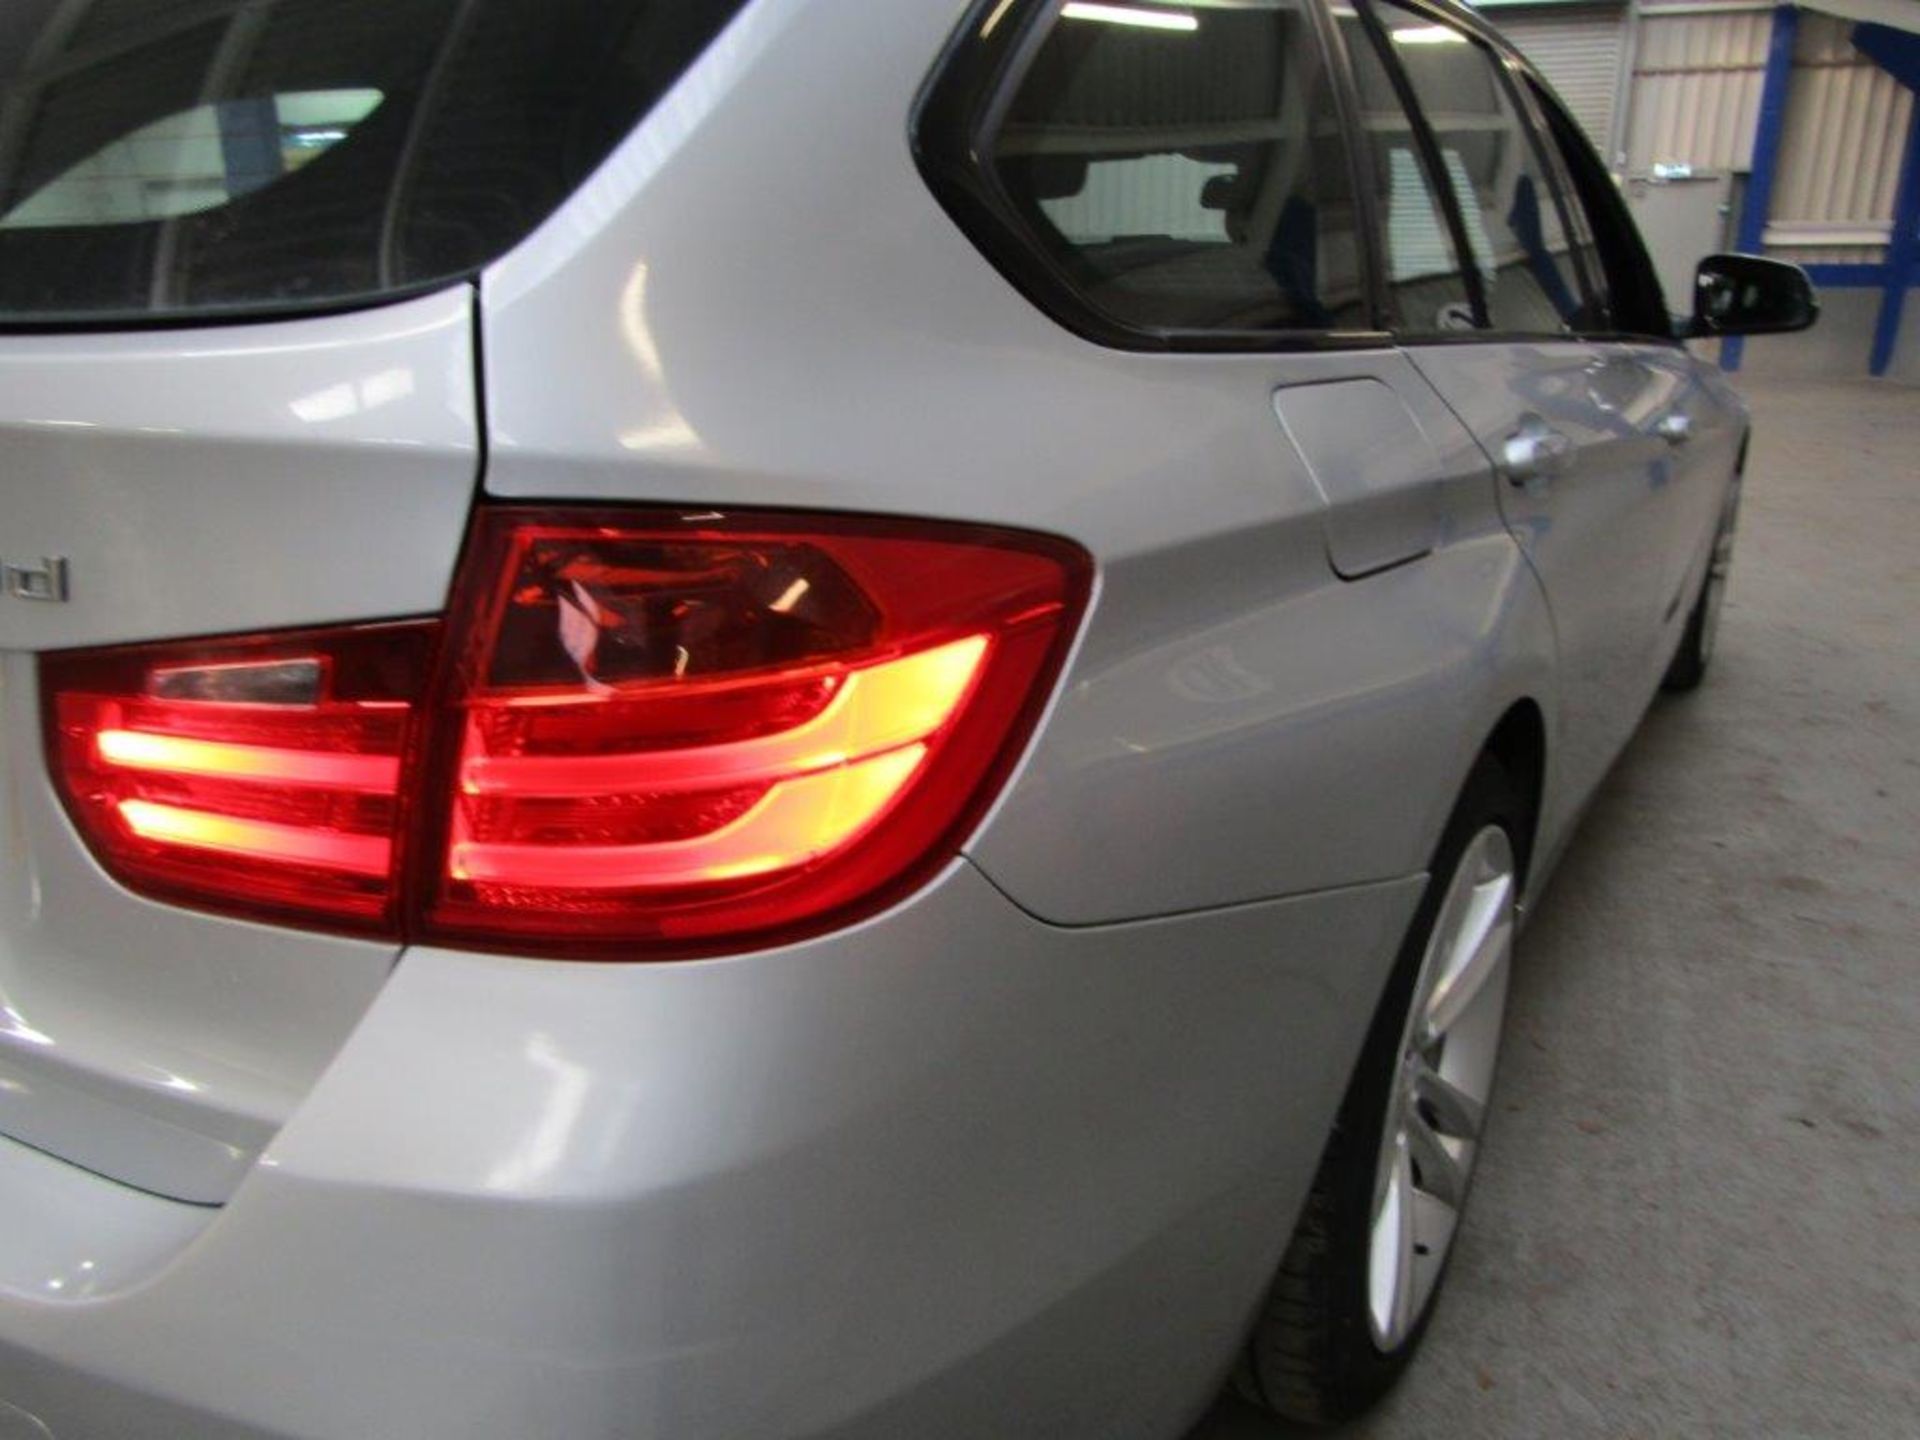 62 12 BMW 320D Sport Touring - Image 17 of 29